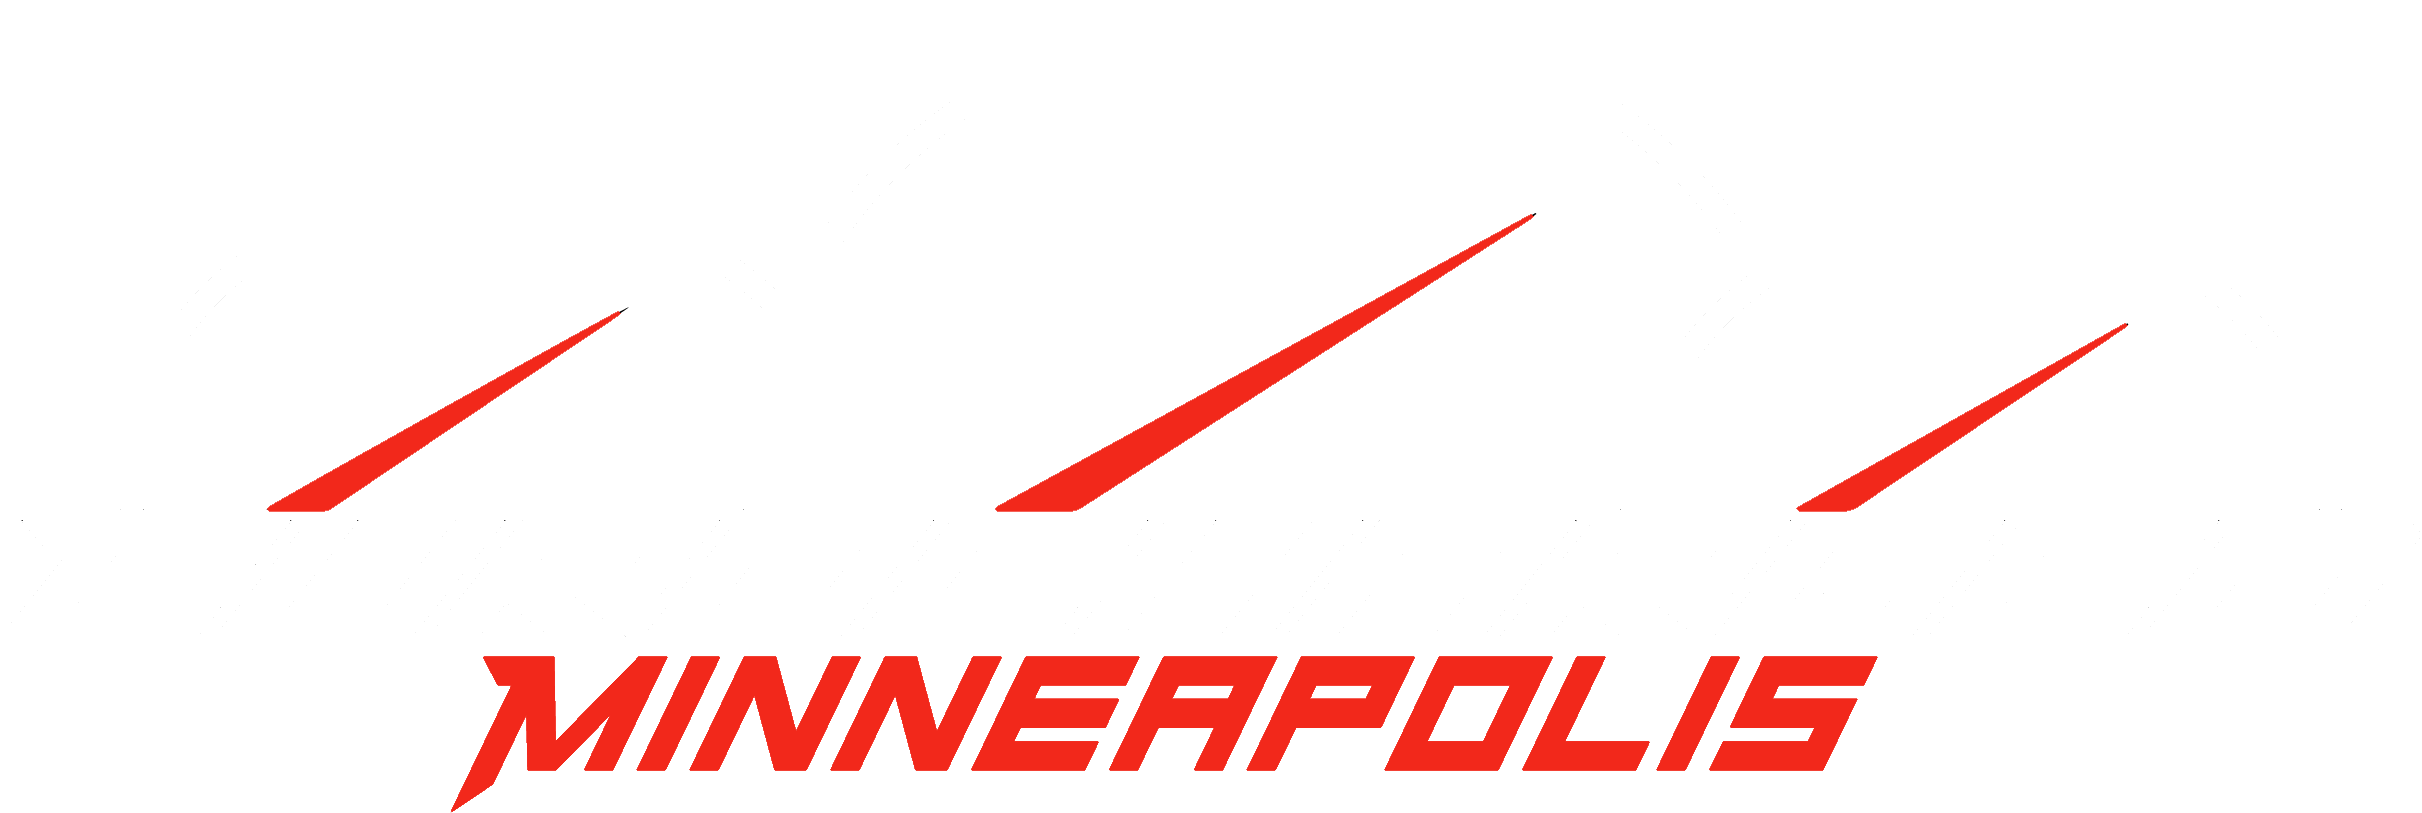 Eurocharged Logo White Red.png